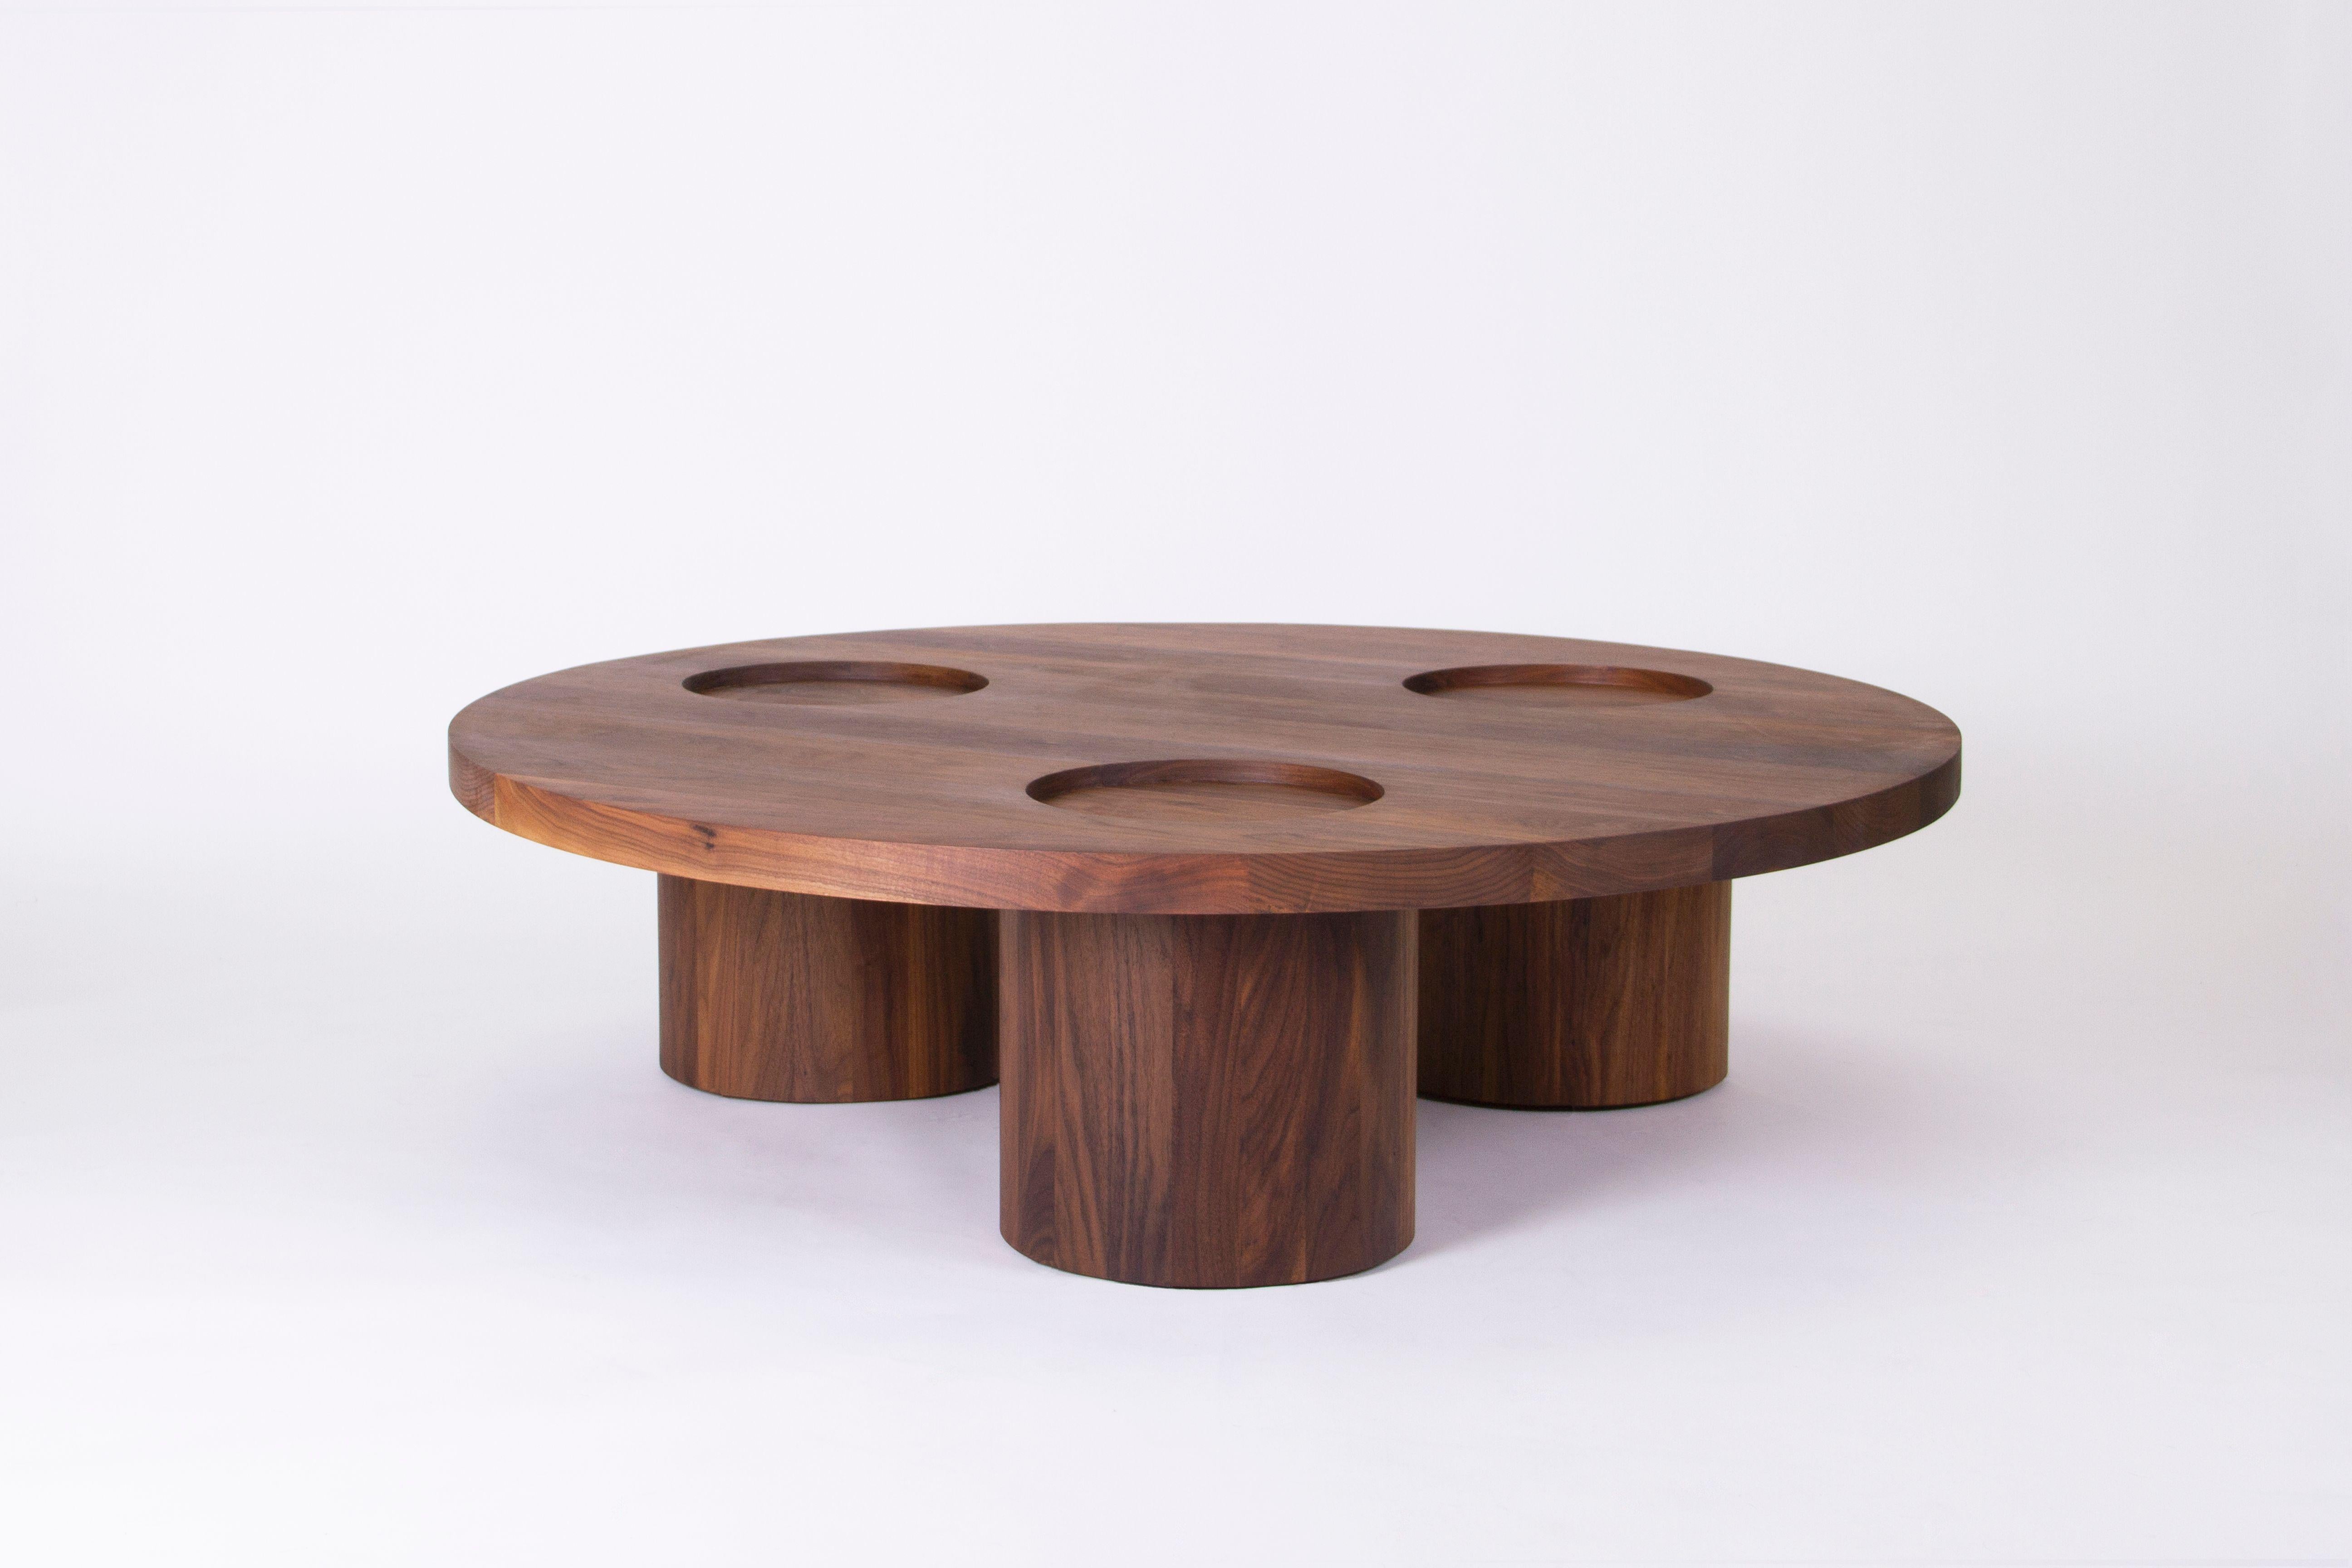 Vassoio table by Estudio Persona
Dimensions: W 129.6 x H 35.6 cm
Materials: Walnut

Coffee table in solid wood.
Available in walnut, white oak, red oak, maple and black stained ash.


Estudio Persona was created by Emiliana Gonzalez and